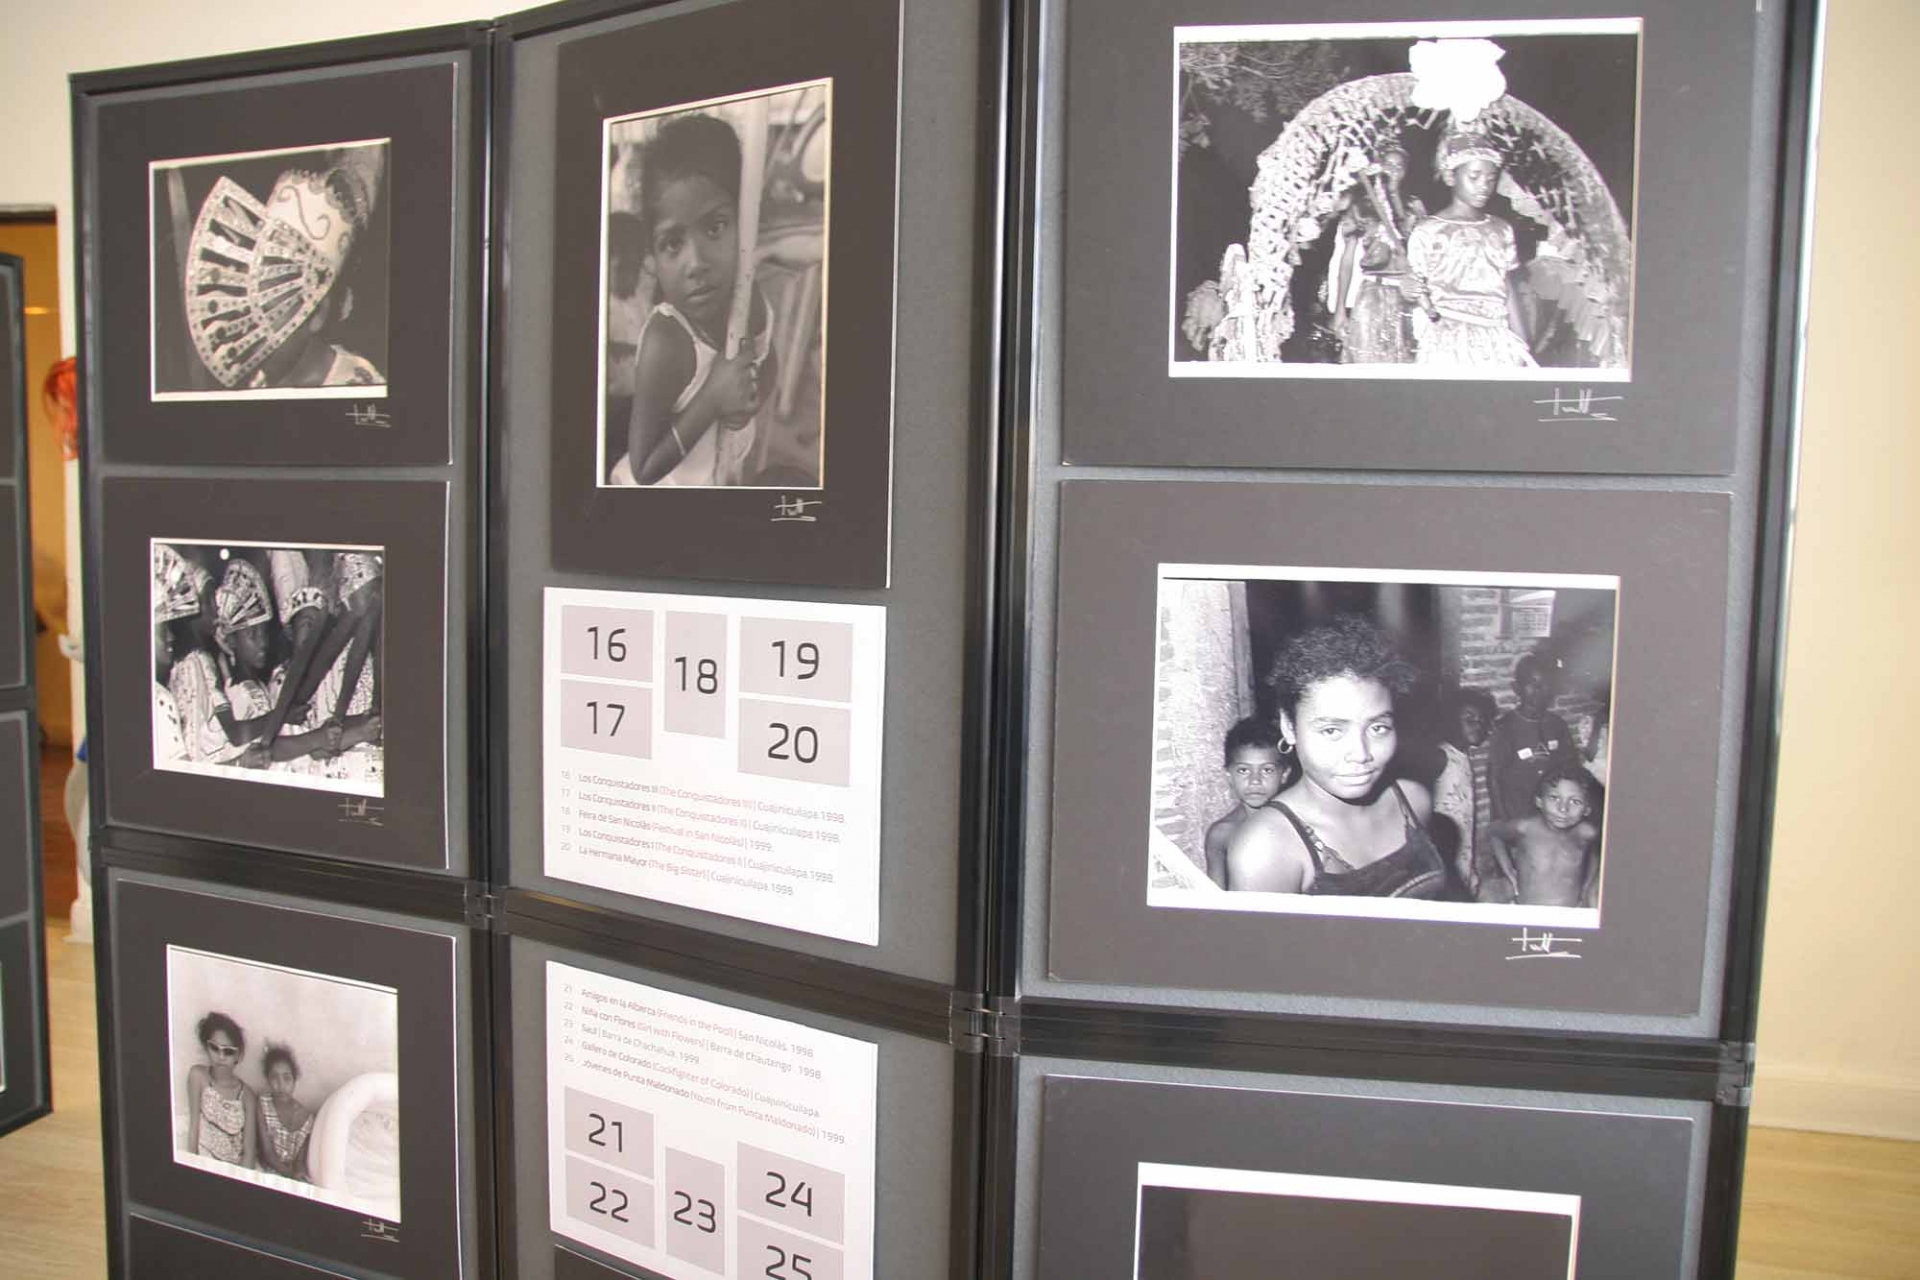 Some of the photographs from the exhibition “Ébano” by Nicolás Triedo, which features 35 black and white images from Costa Chica, courtesy of the Consulate of Mexico in San Bernardino.